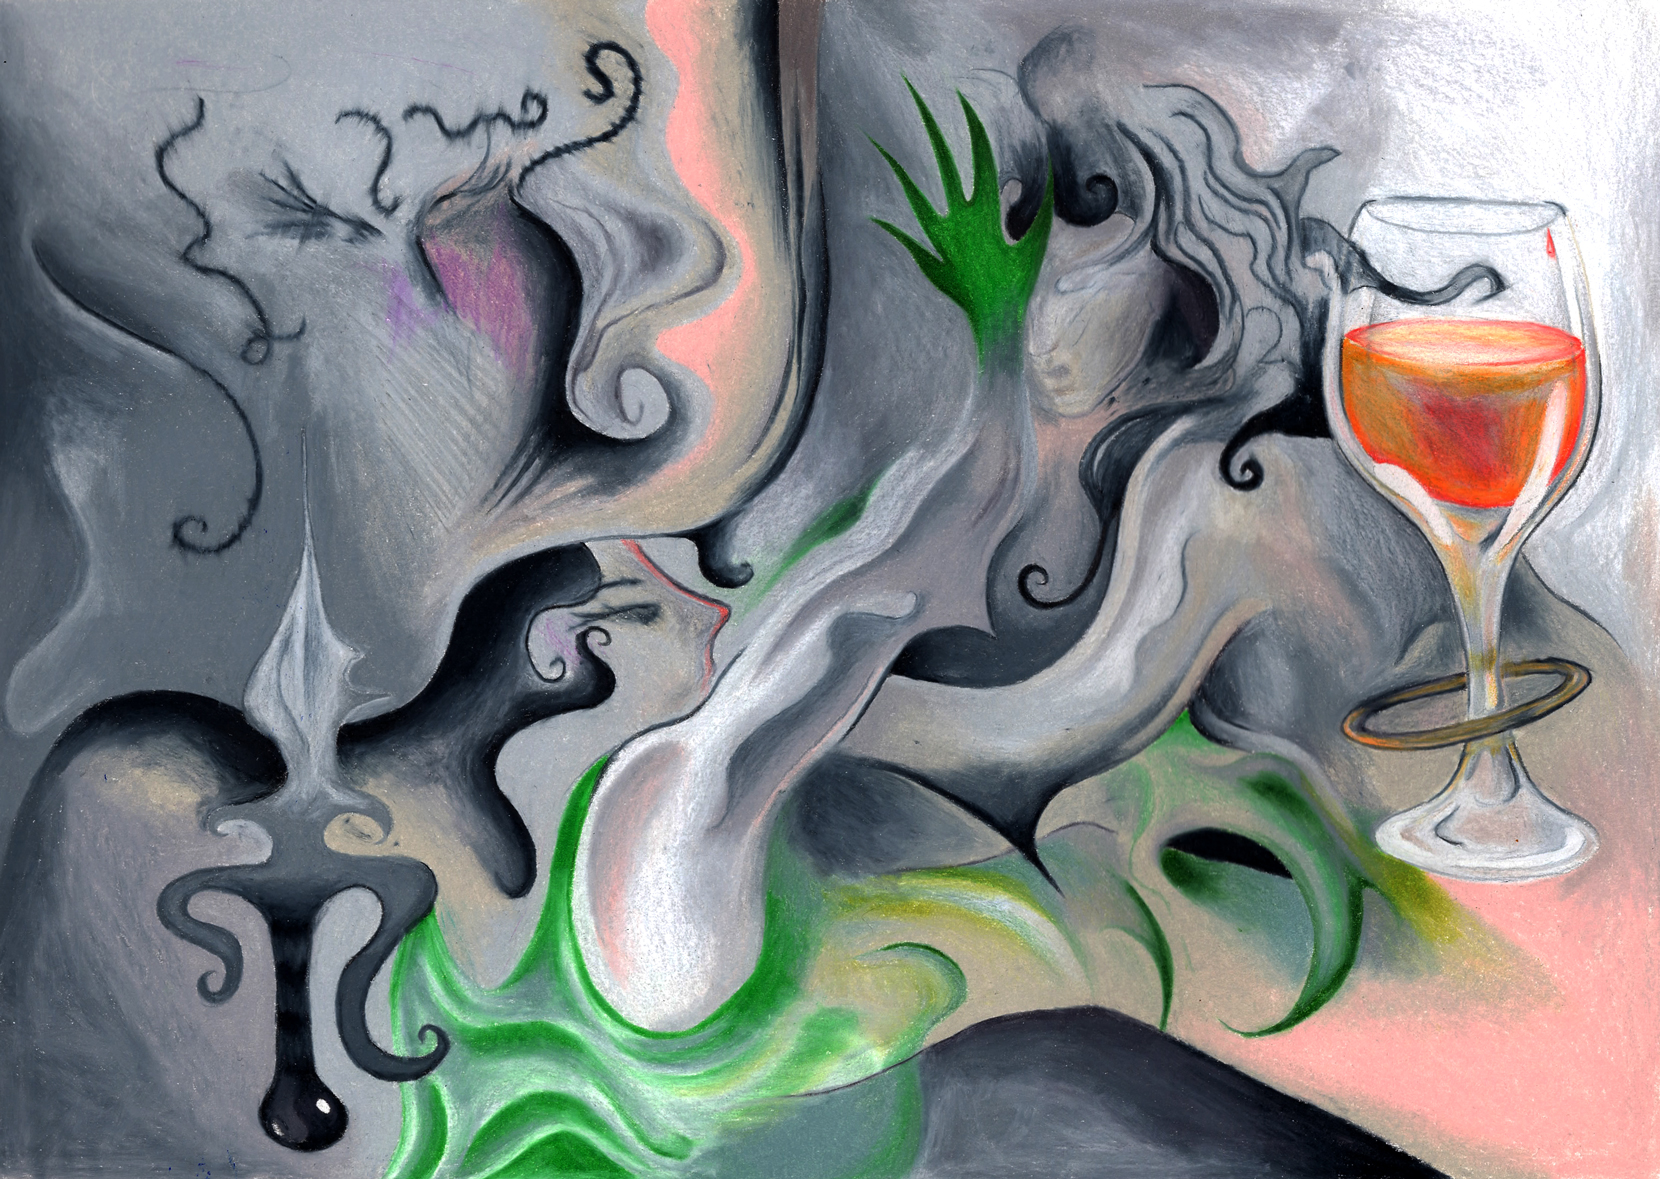 A swirling abstracted drawing in shades of grey, green and orange. Faces, hands, a dagger and a wine glass appear within the mist.